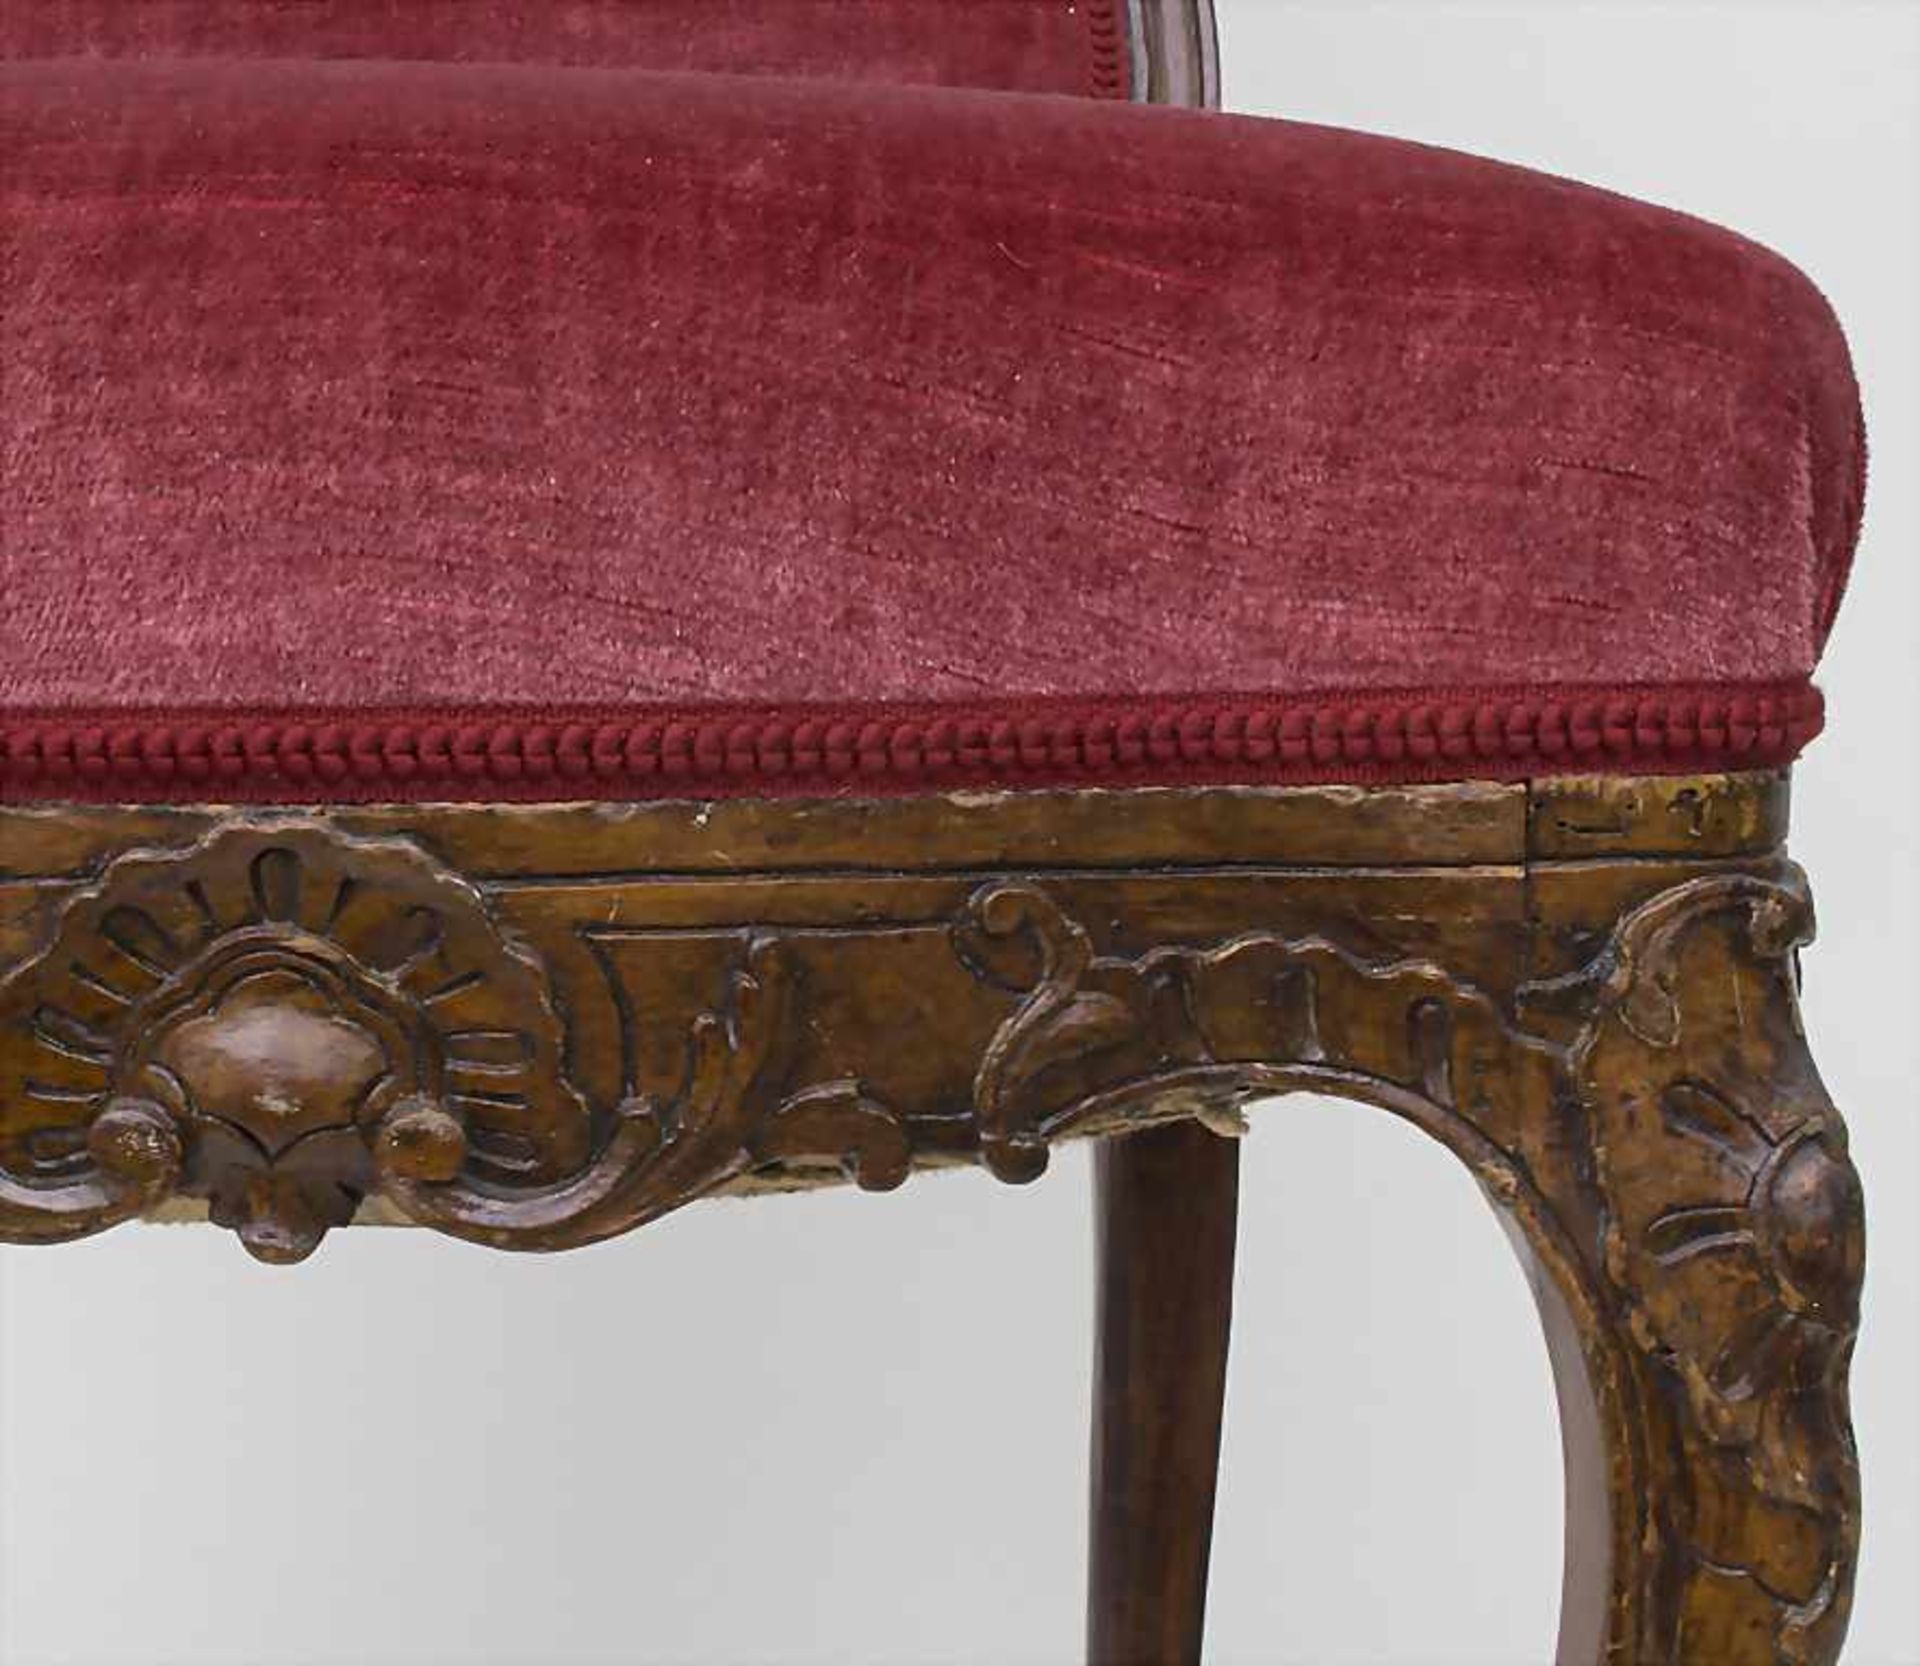 Rokoko--Stuhl mit Rocaillendekor / A Rococo chair with rocailles - Image 4 of 5